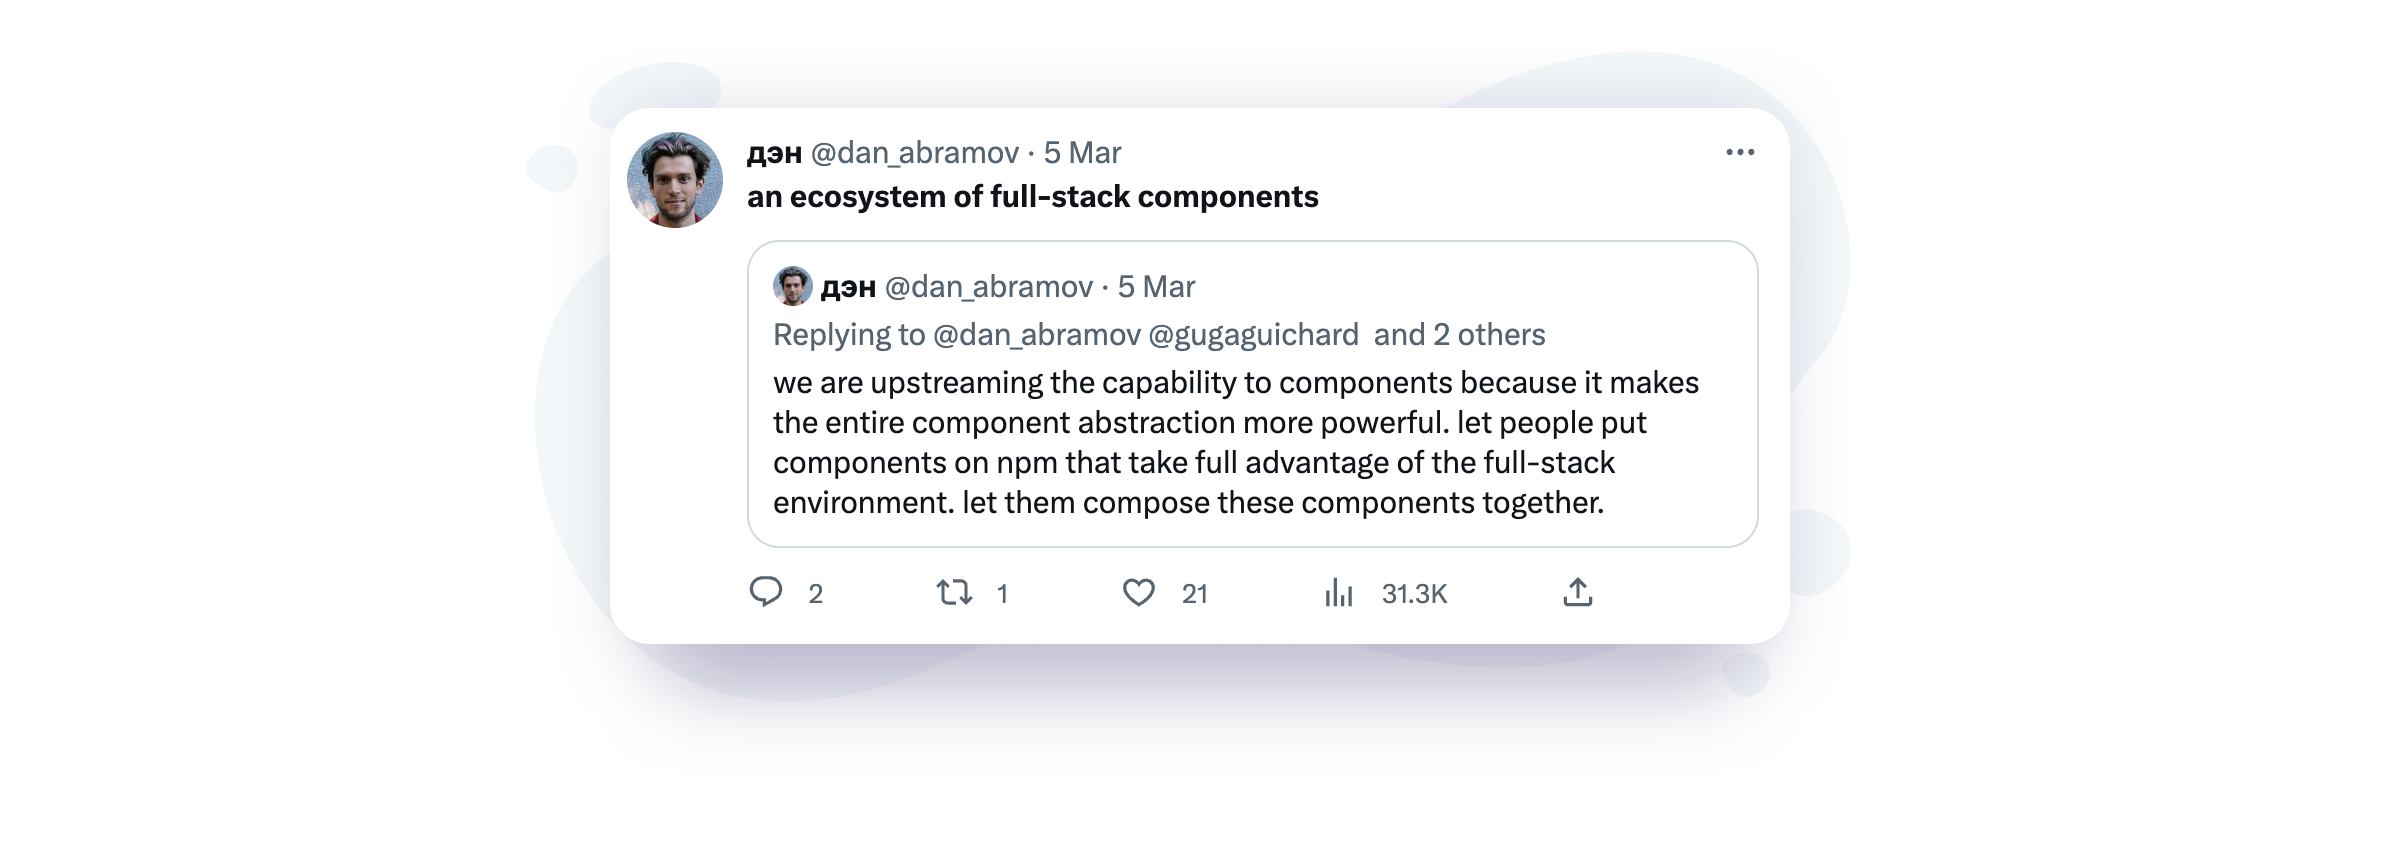 An ecosystem of full-stack components 